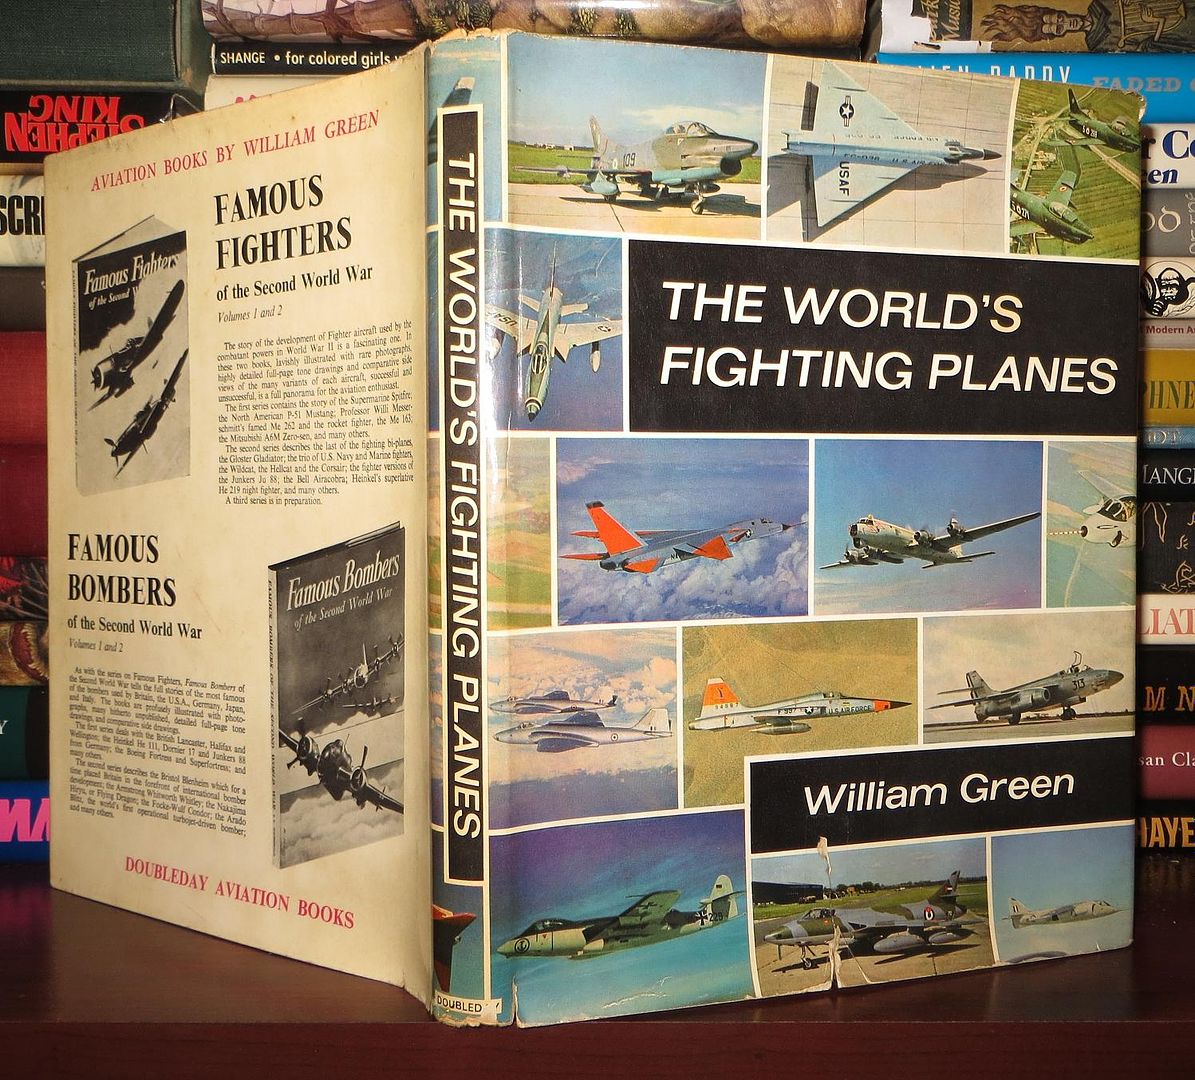 GREEN, WILLIAM - The World's Fighting Planes